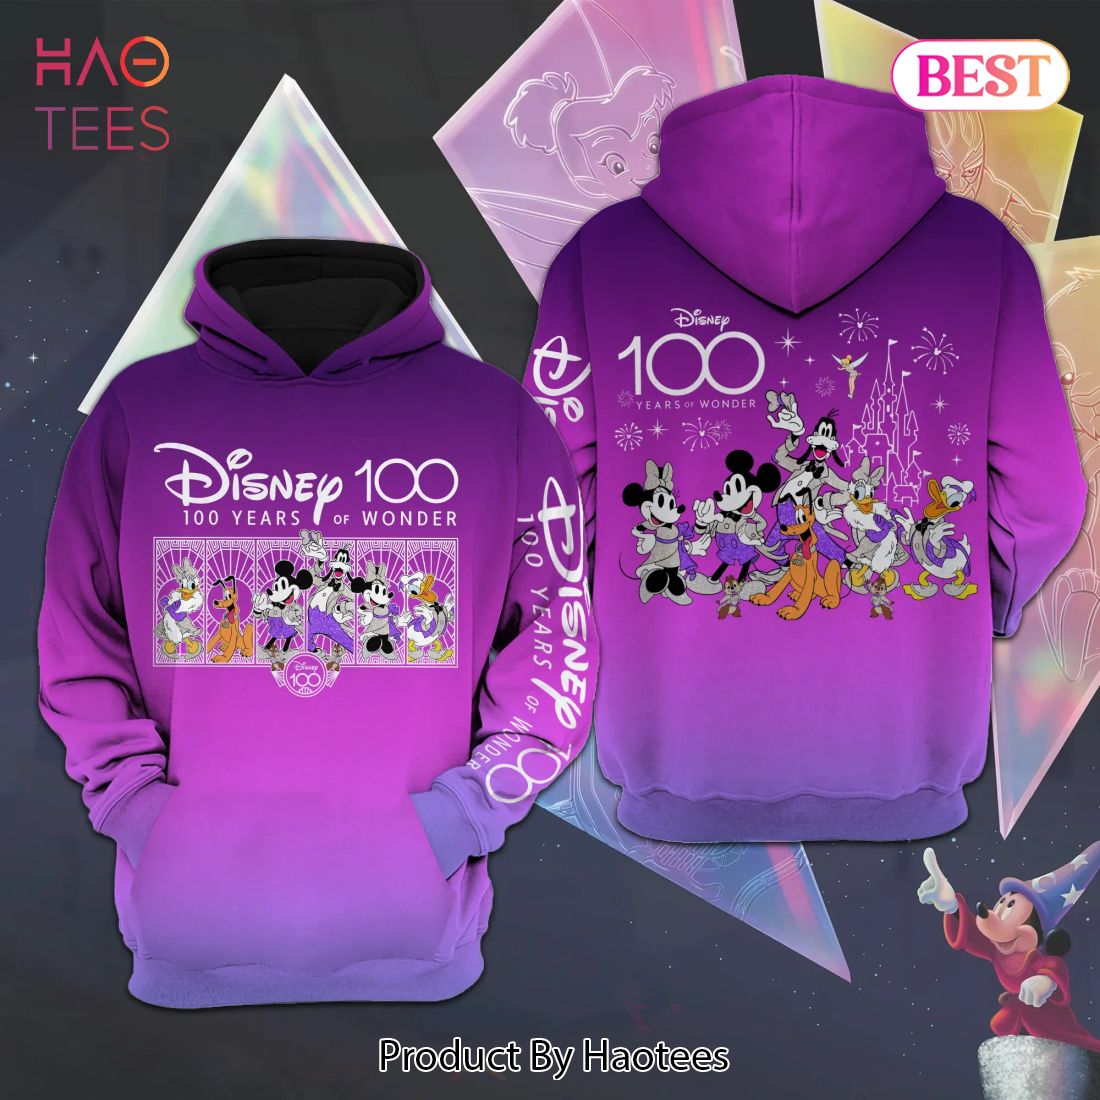 Disney 100 Years Purple Unisex Hoodie Luxury Brand Clothing Special Gift Outfit For Men Women